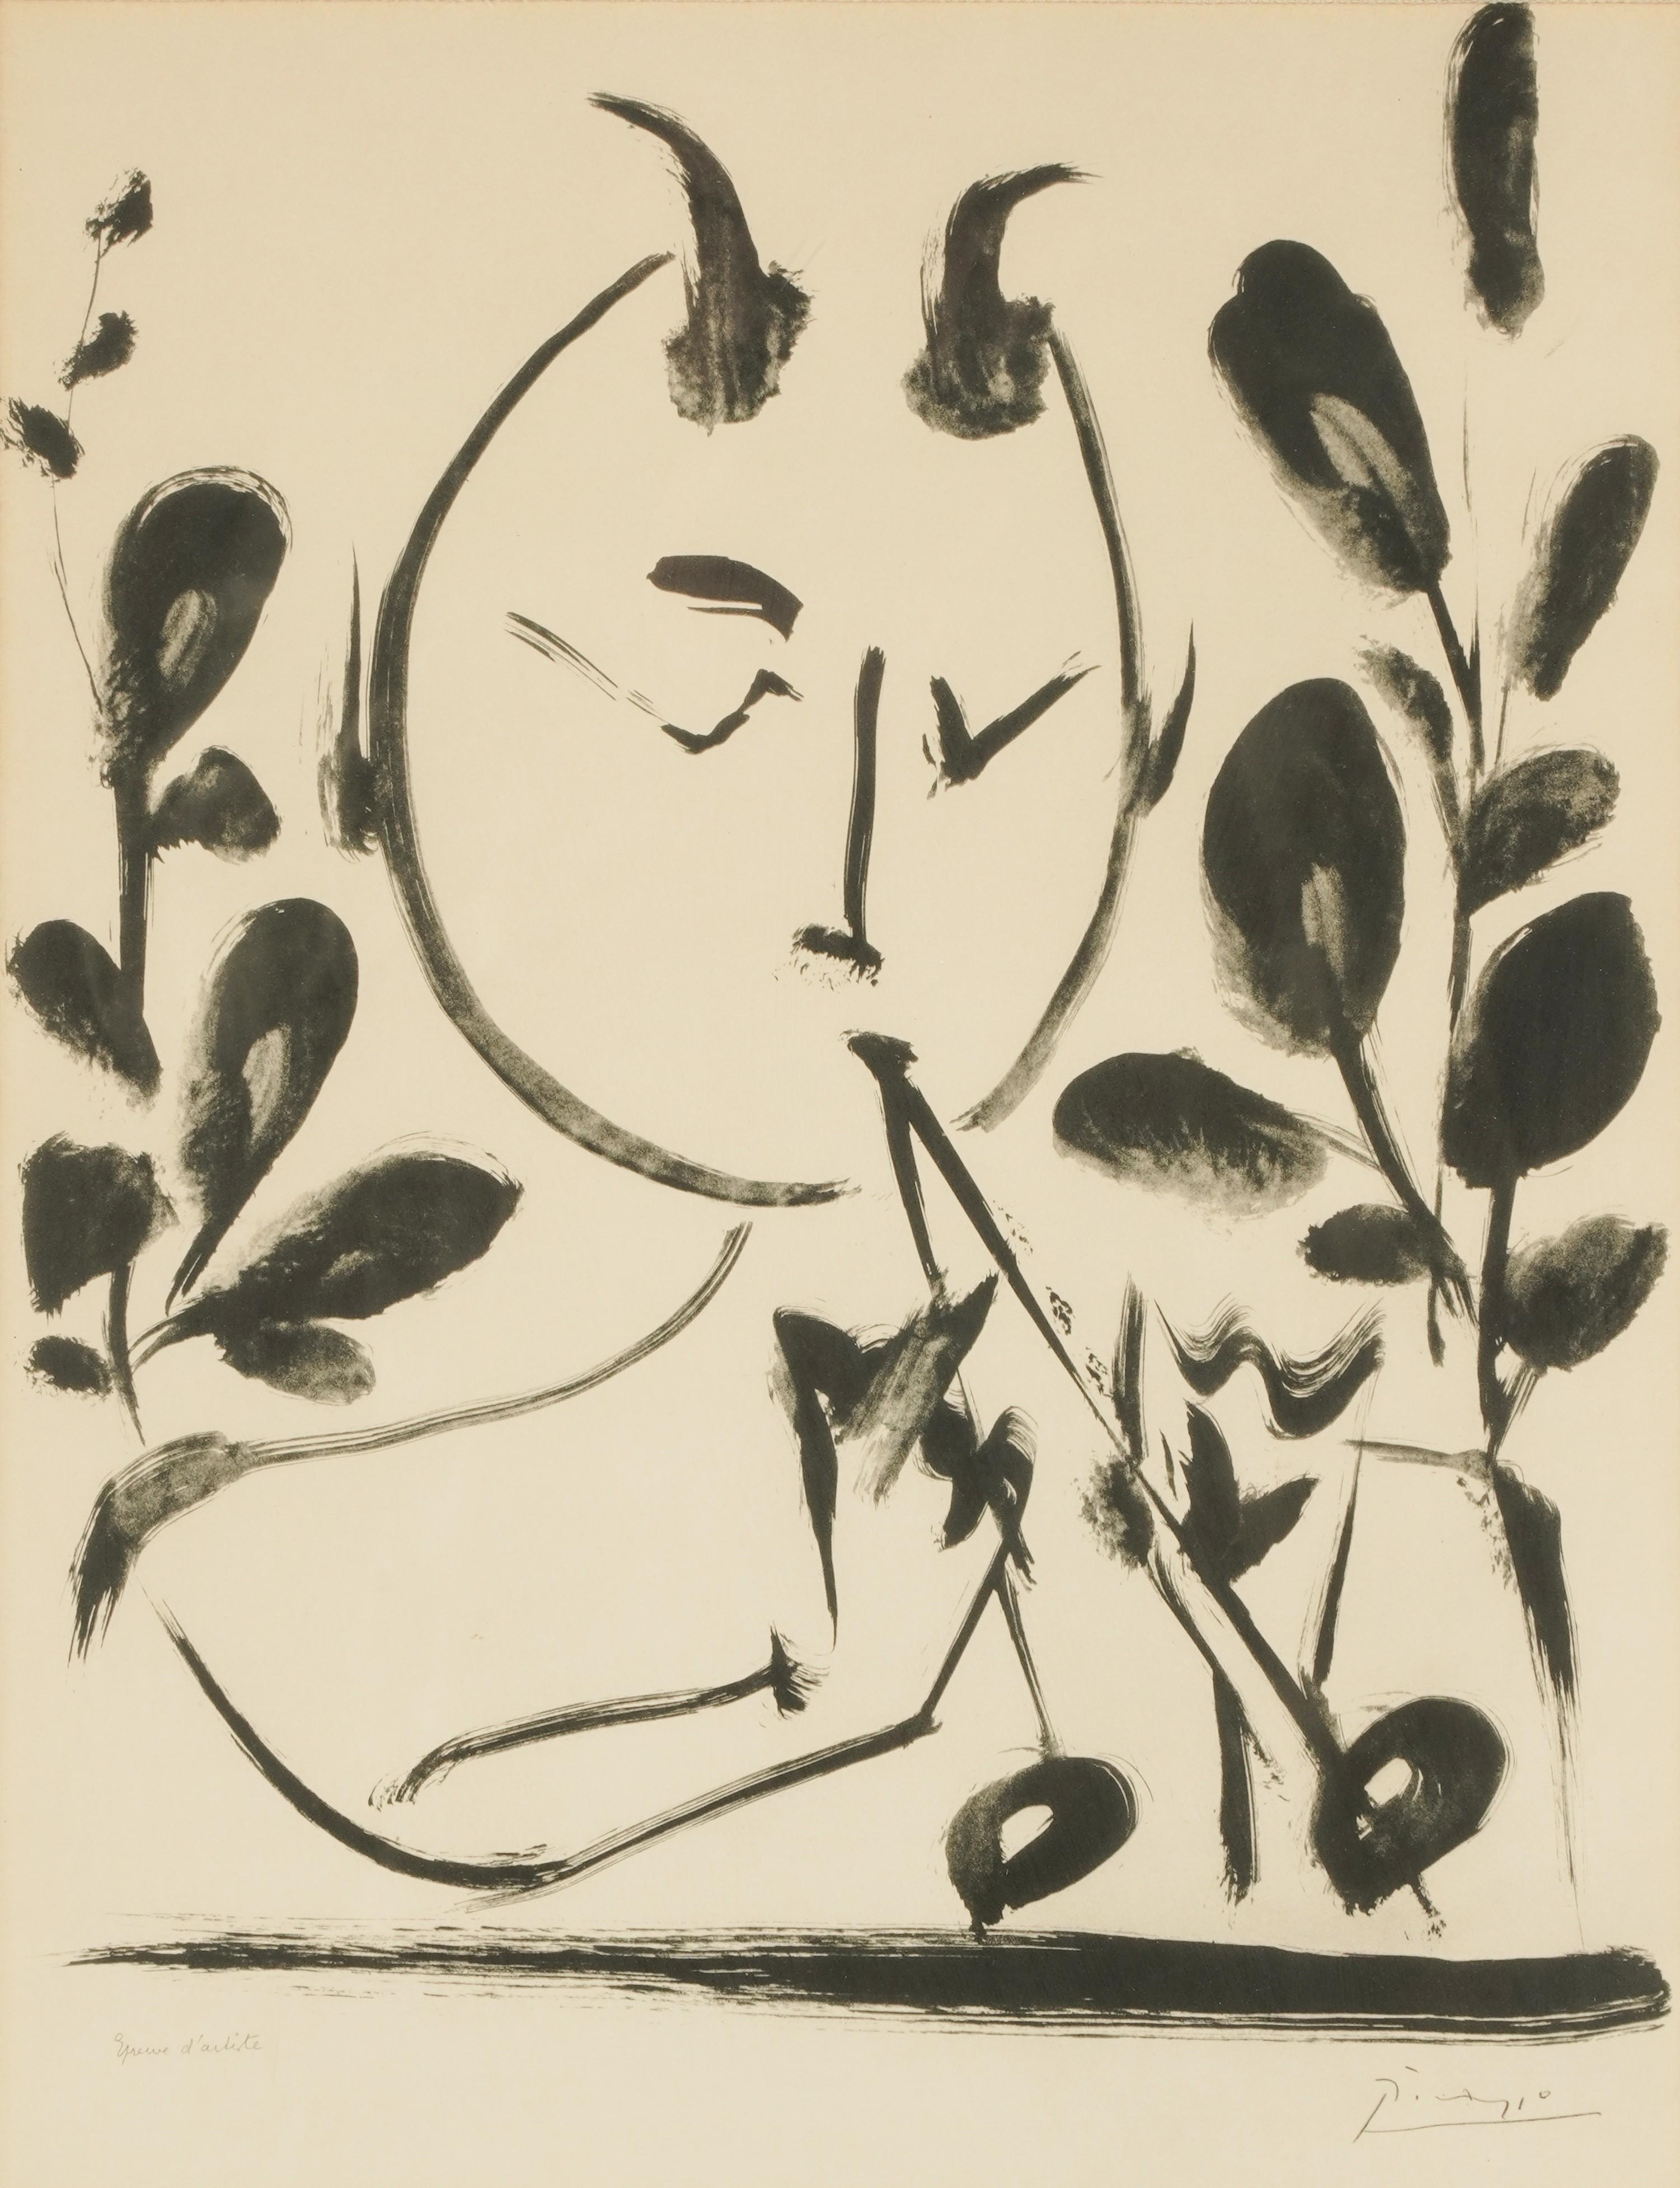 After Picasso: Fawn with Pipe by Pablo Picasso